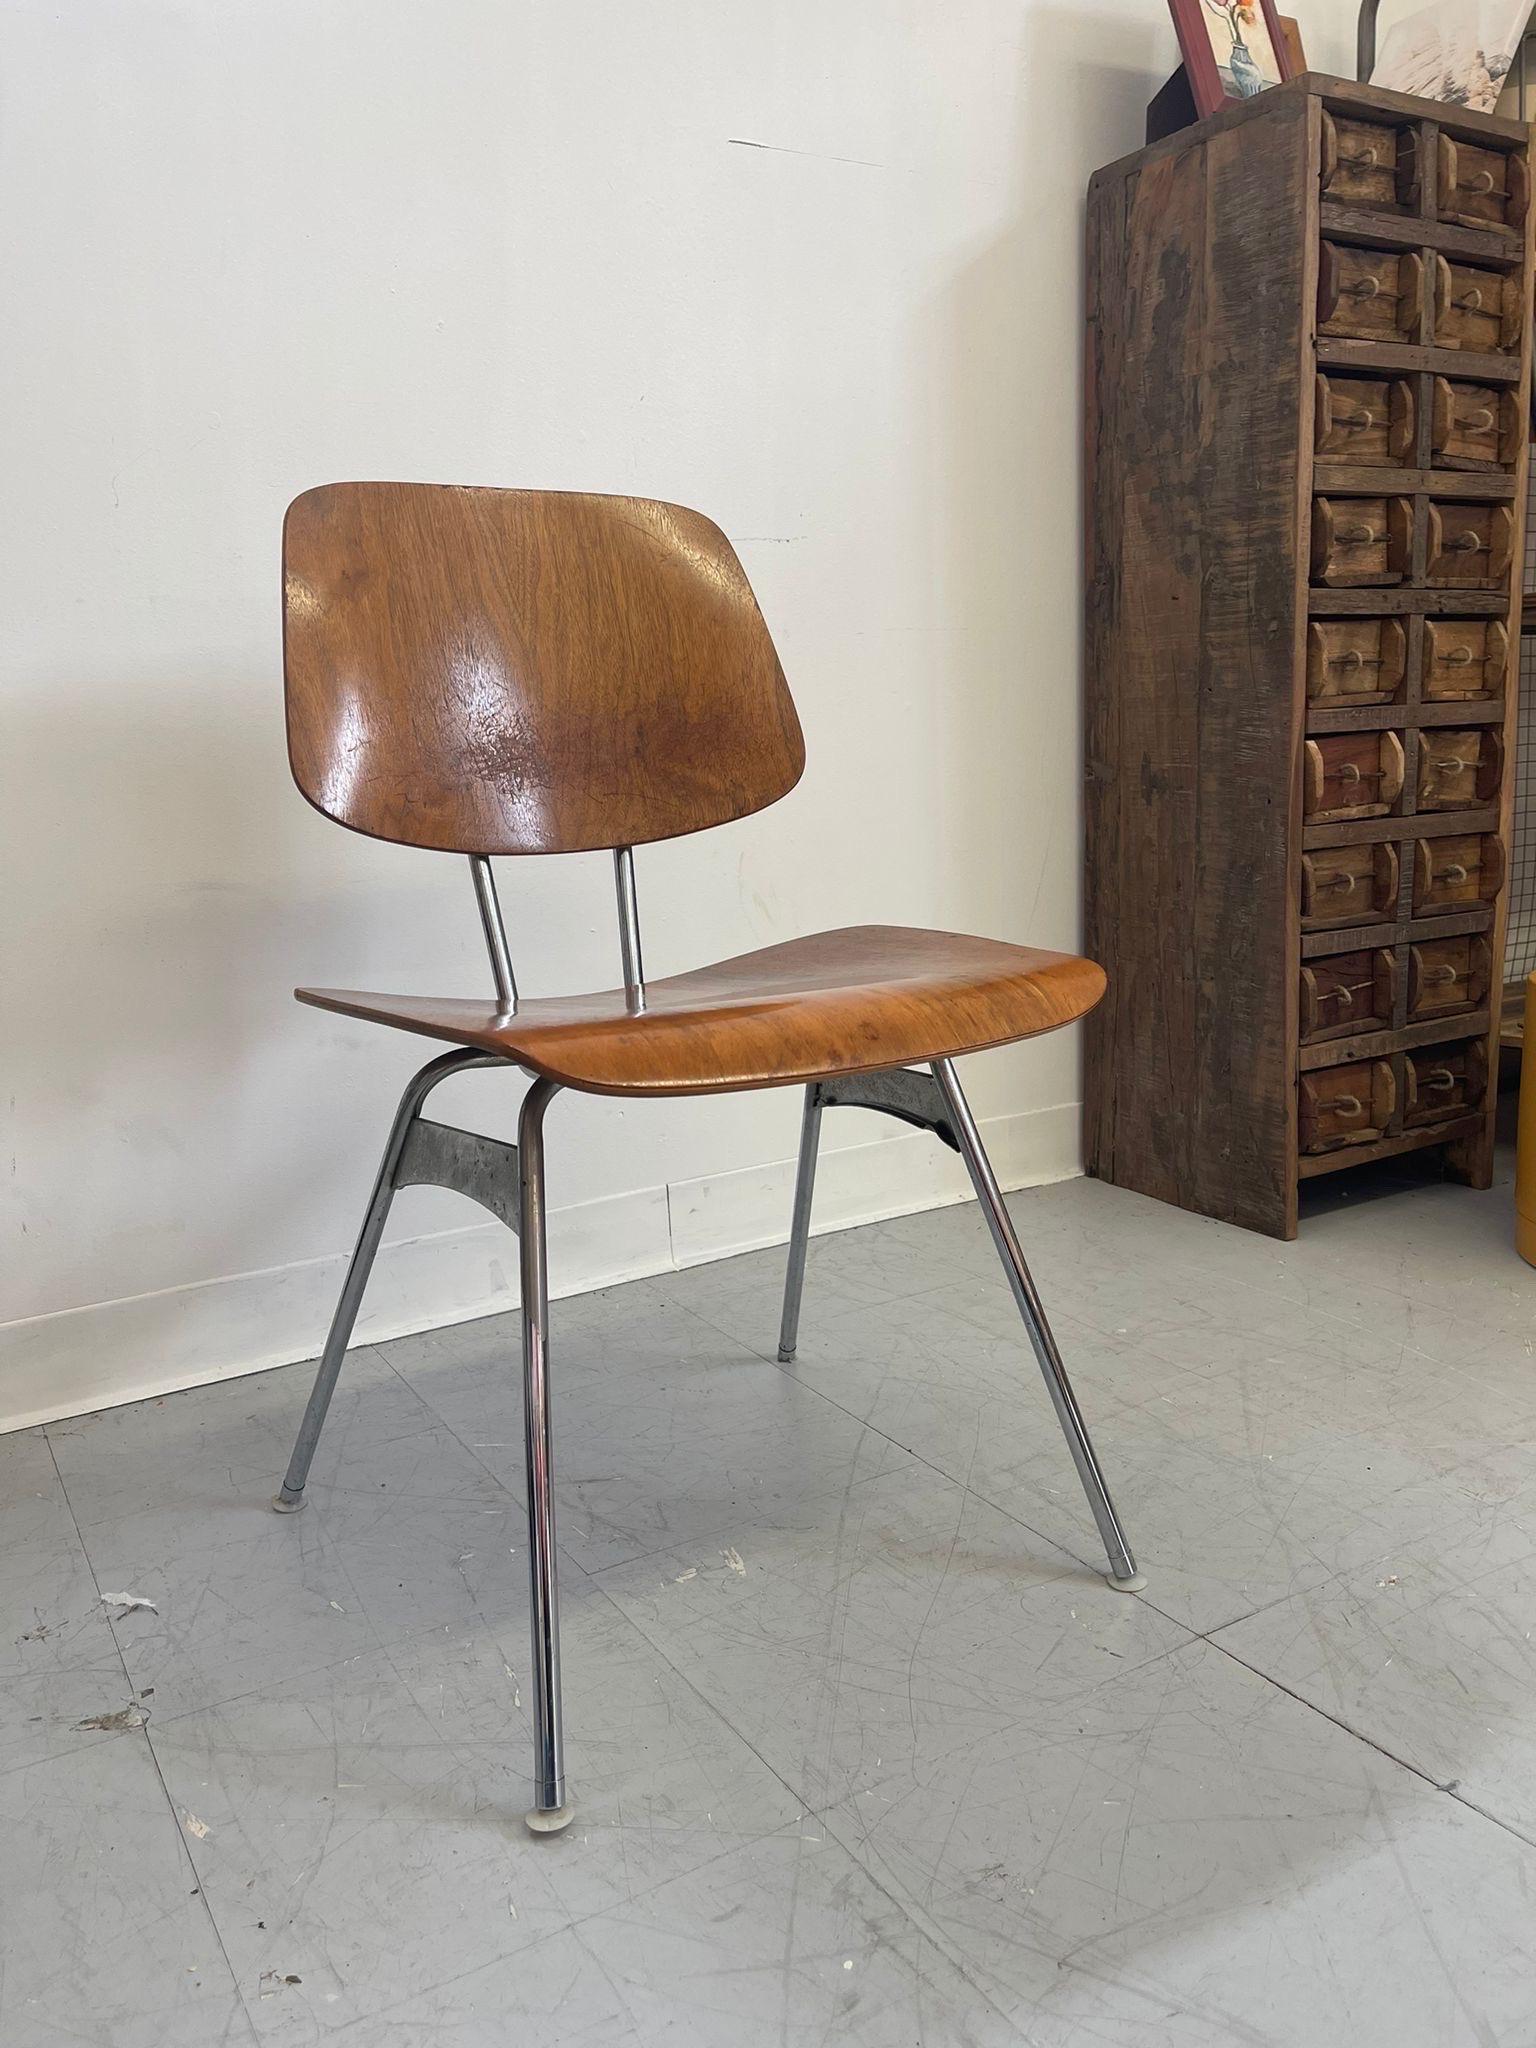 Makers Mark on the Back as Pictured. Molded Plywood Chair in the Style of Herman Millar. Vintage Condition Consistent with Age 

Dimensions. 19 W ; 17 D ; 32 H
Seat Height. 17